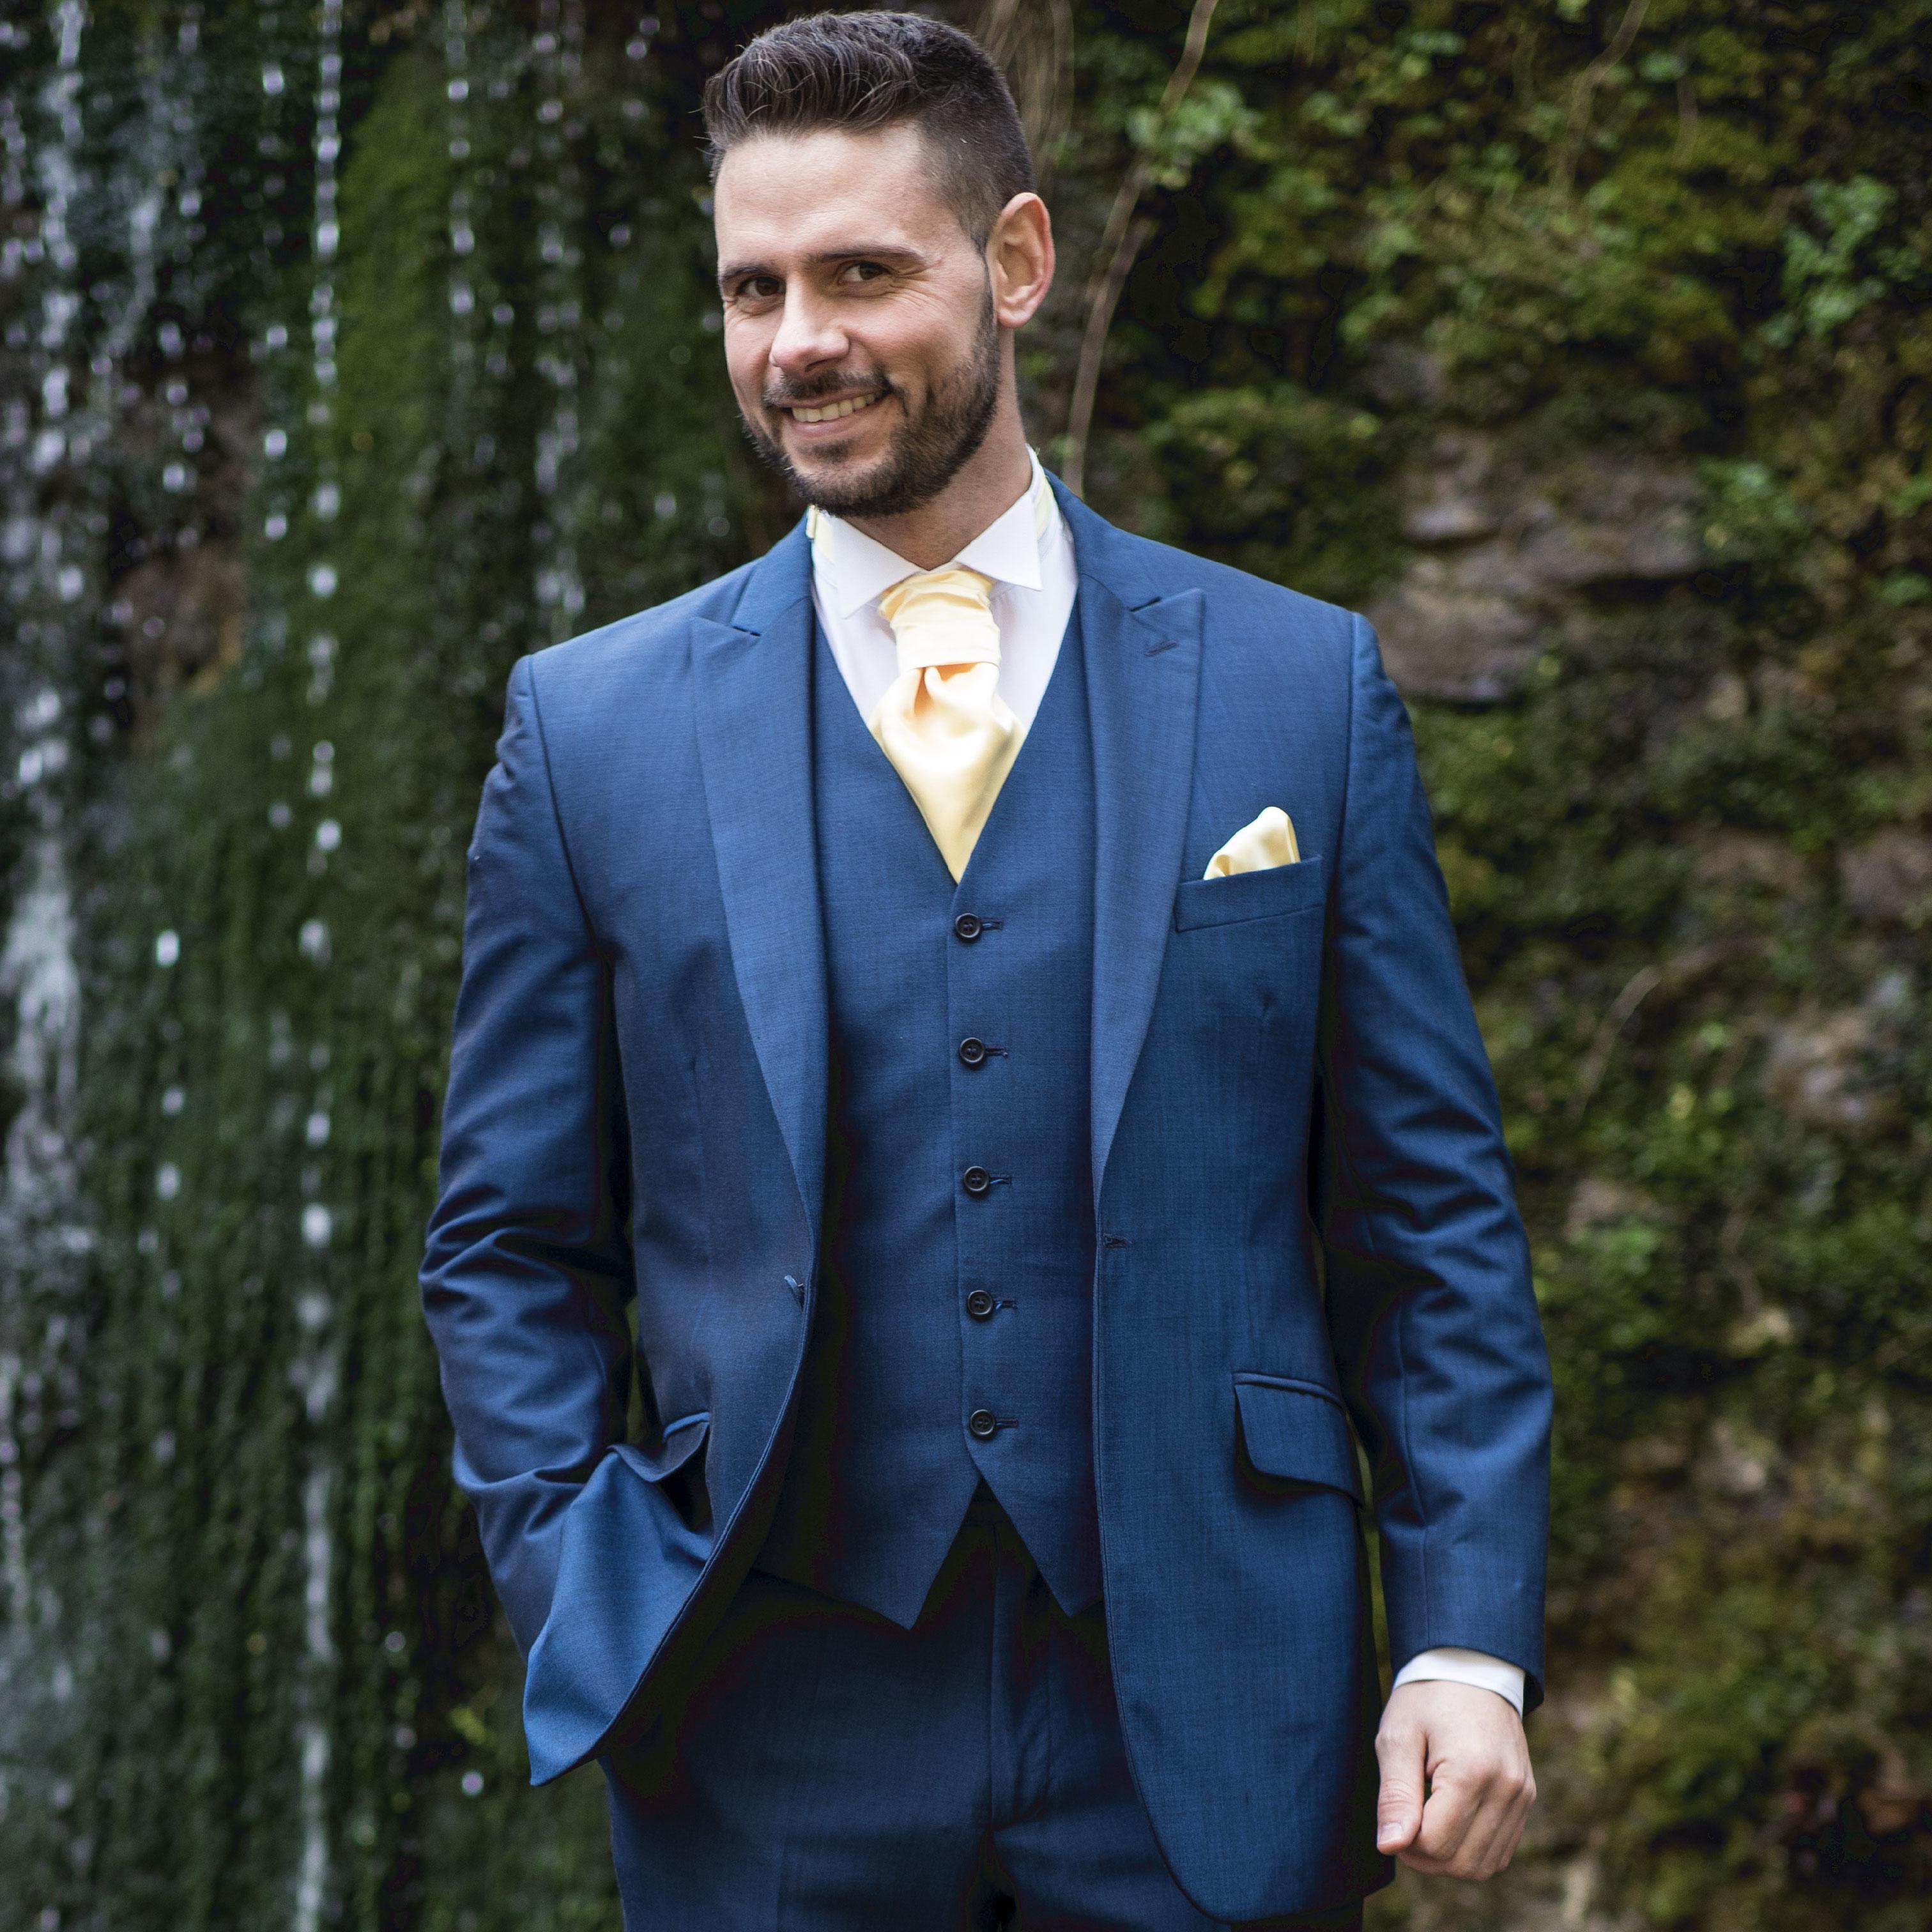 Ocean Blue Lightweight Wedding Suit | Available to Hire or Buy | Formal ...